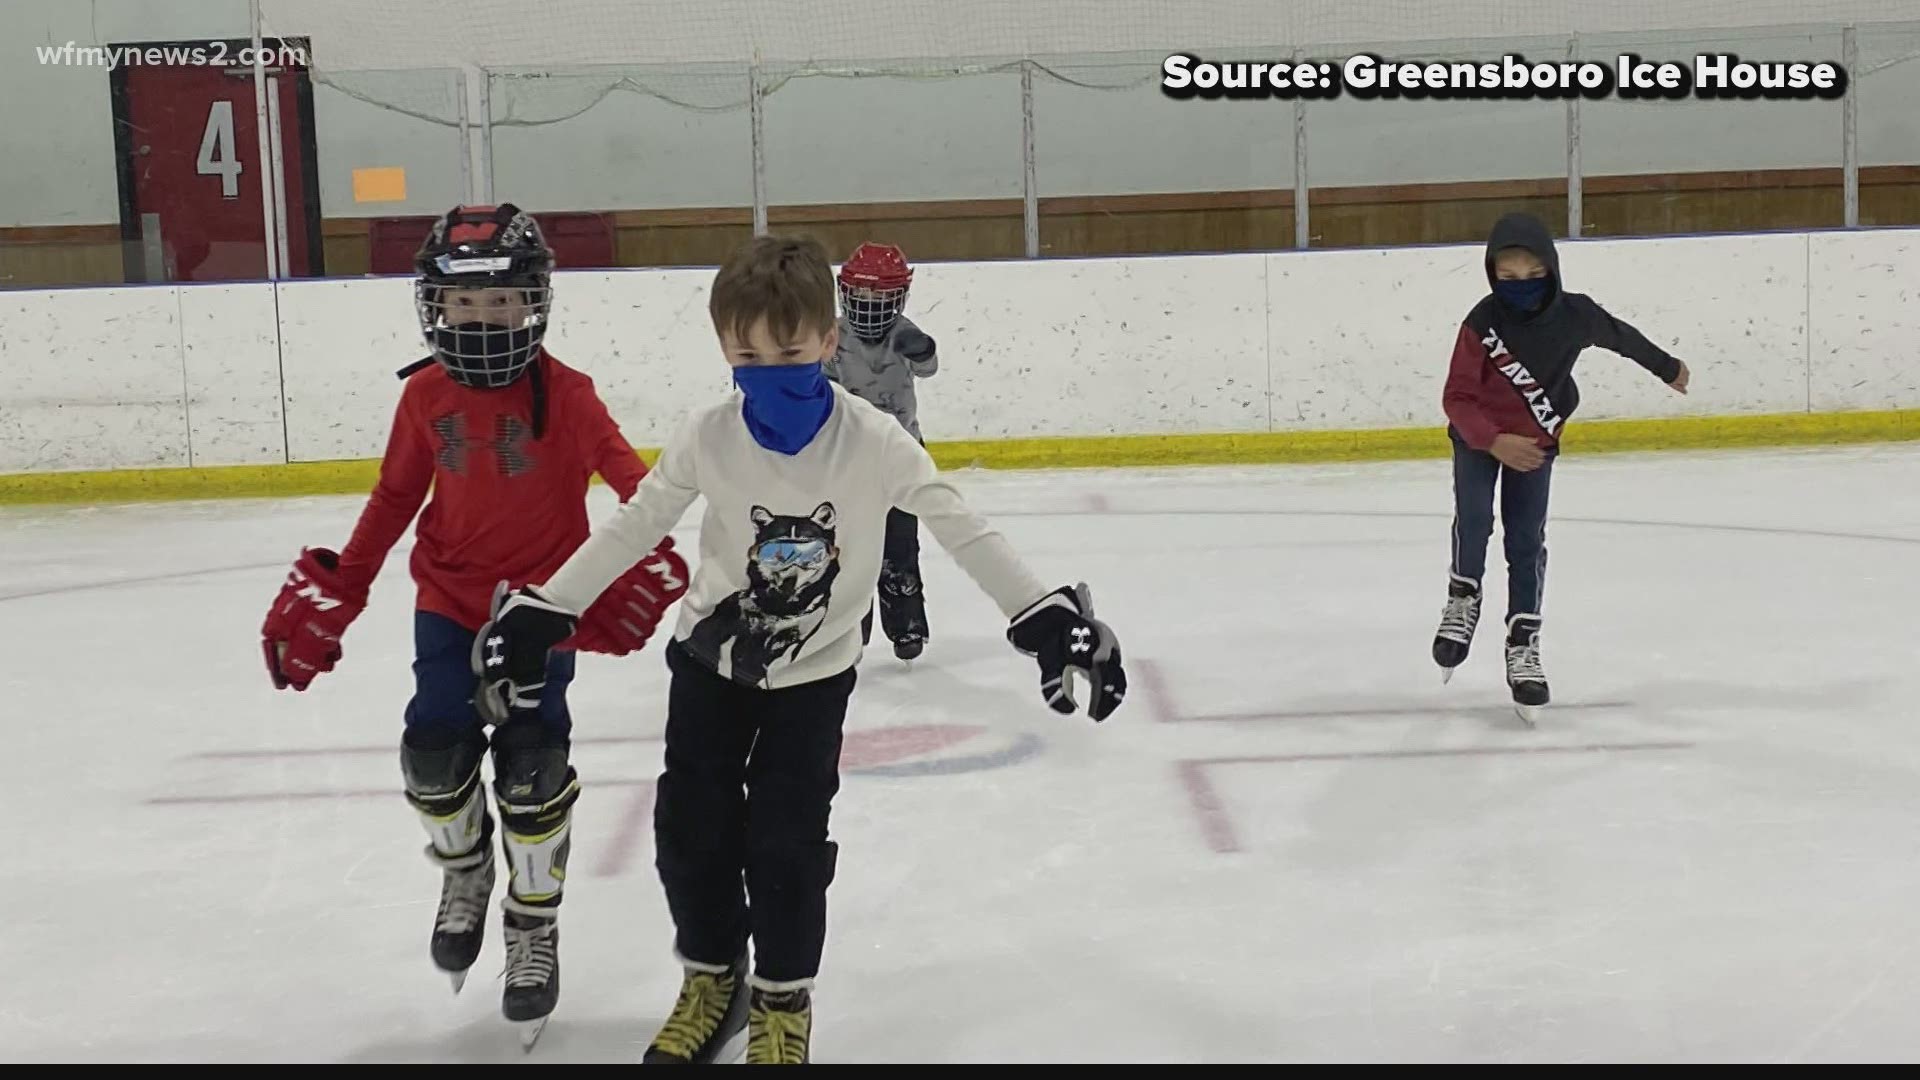 Triad ice rinks are seeing a boost in customers thanks to the Carolina Hurricanes.